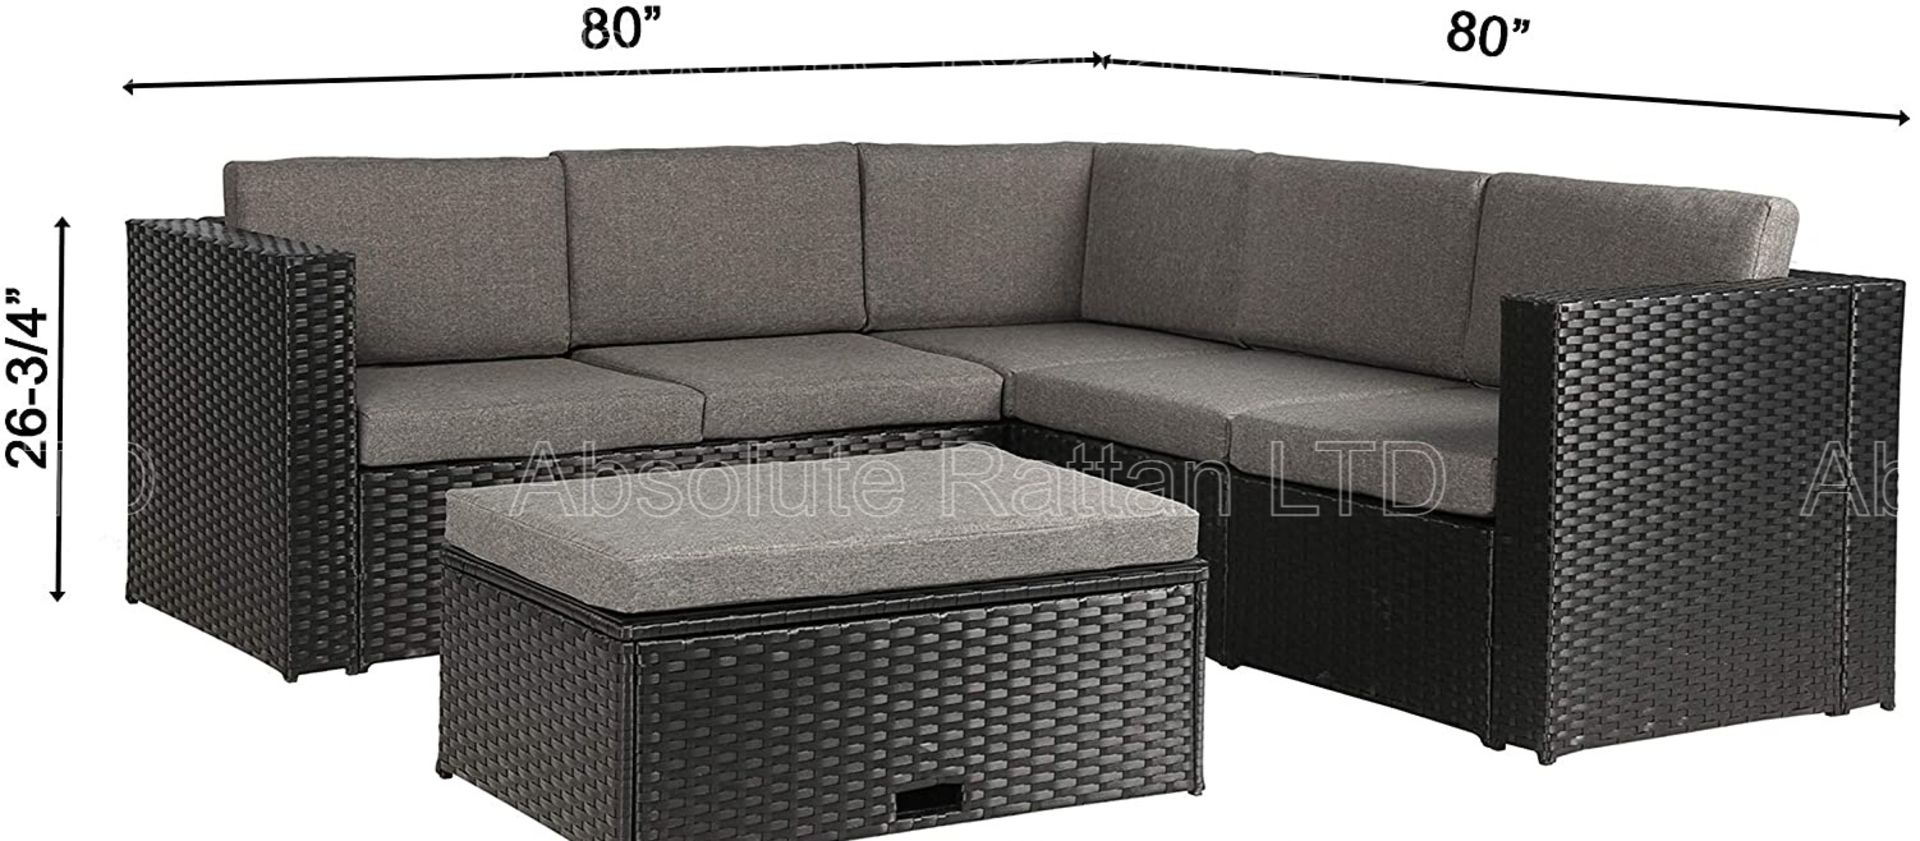 * 1 xBrand New - In Cardboard Boxes - Garden Rattan Furntiure Set. Black Wick with Grey Cushions. - Image 3 of 6